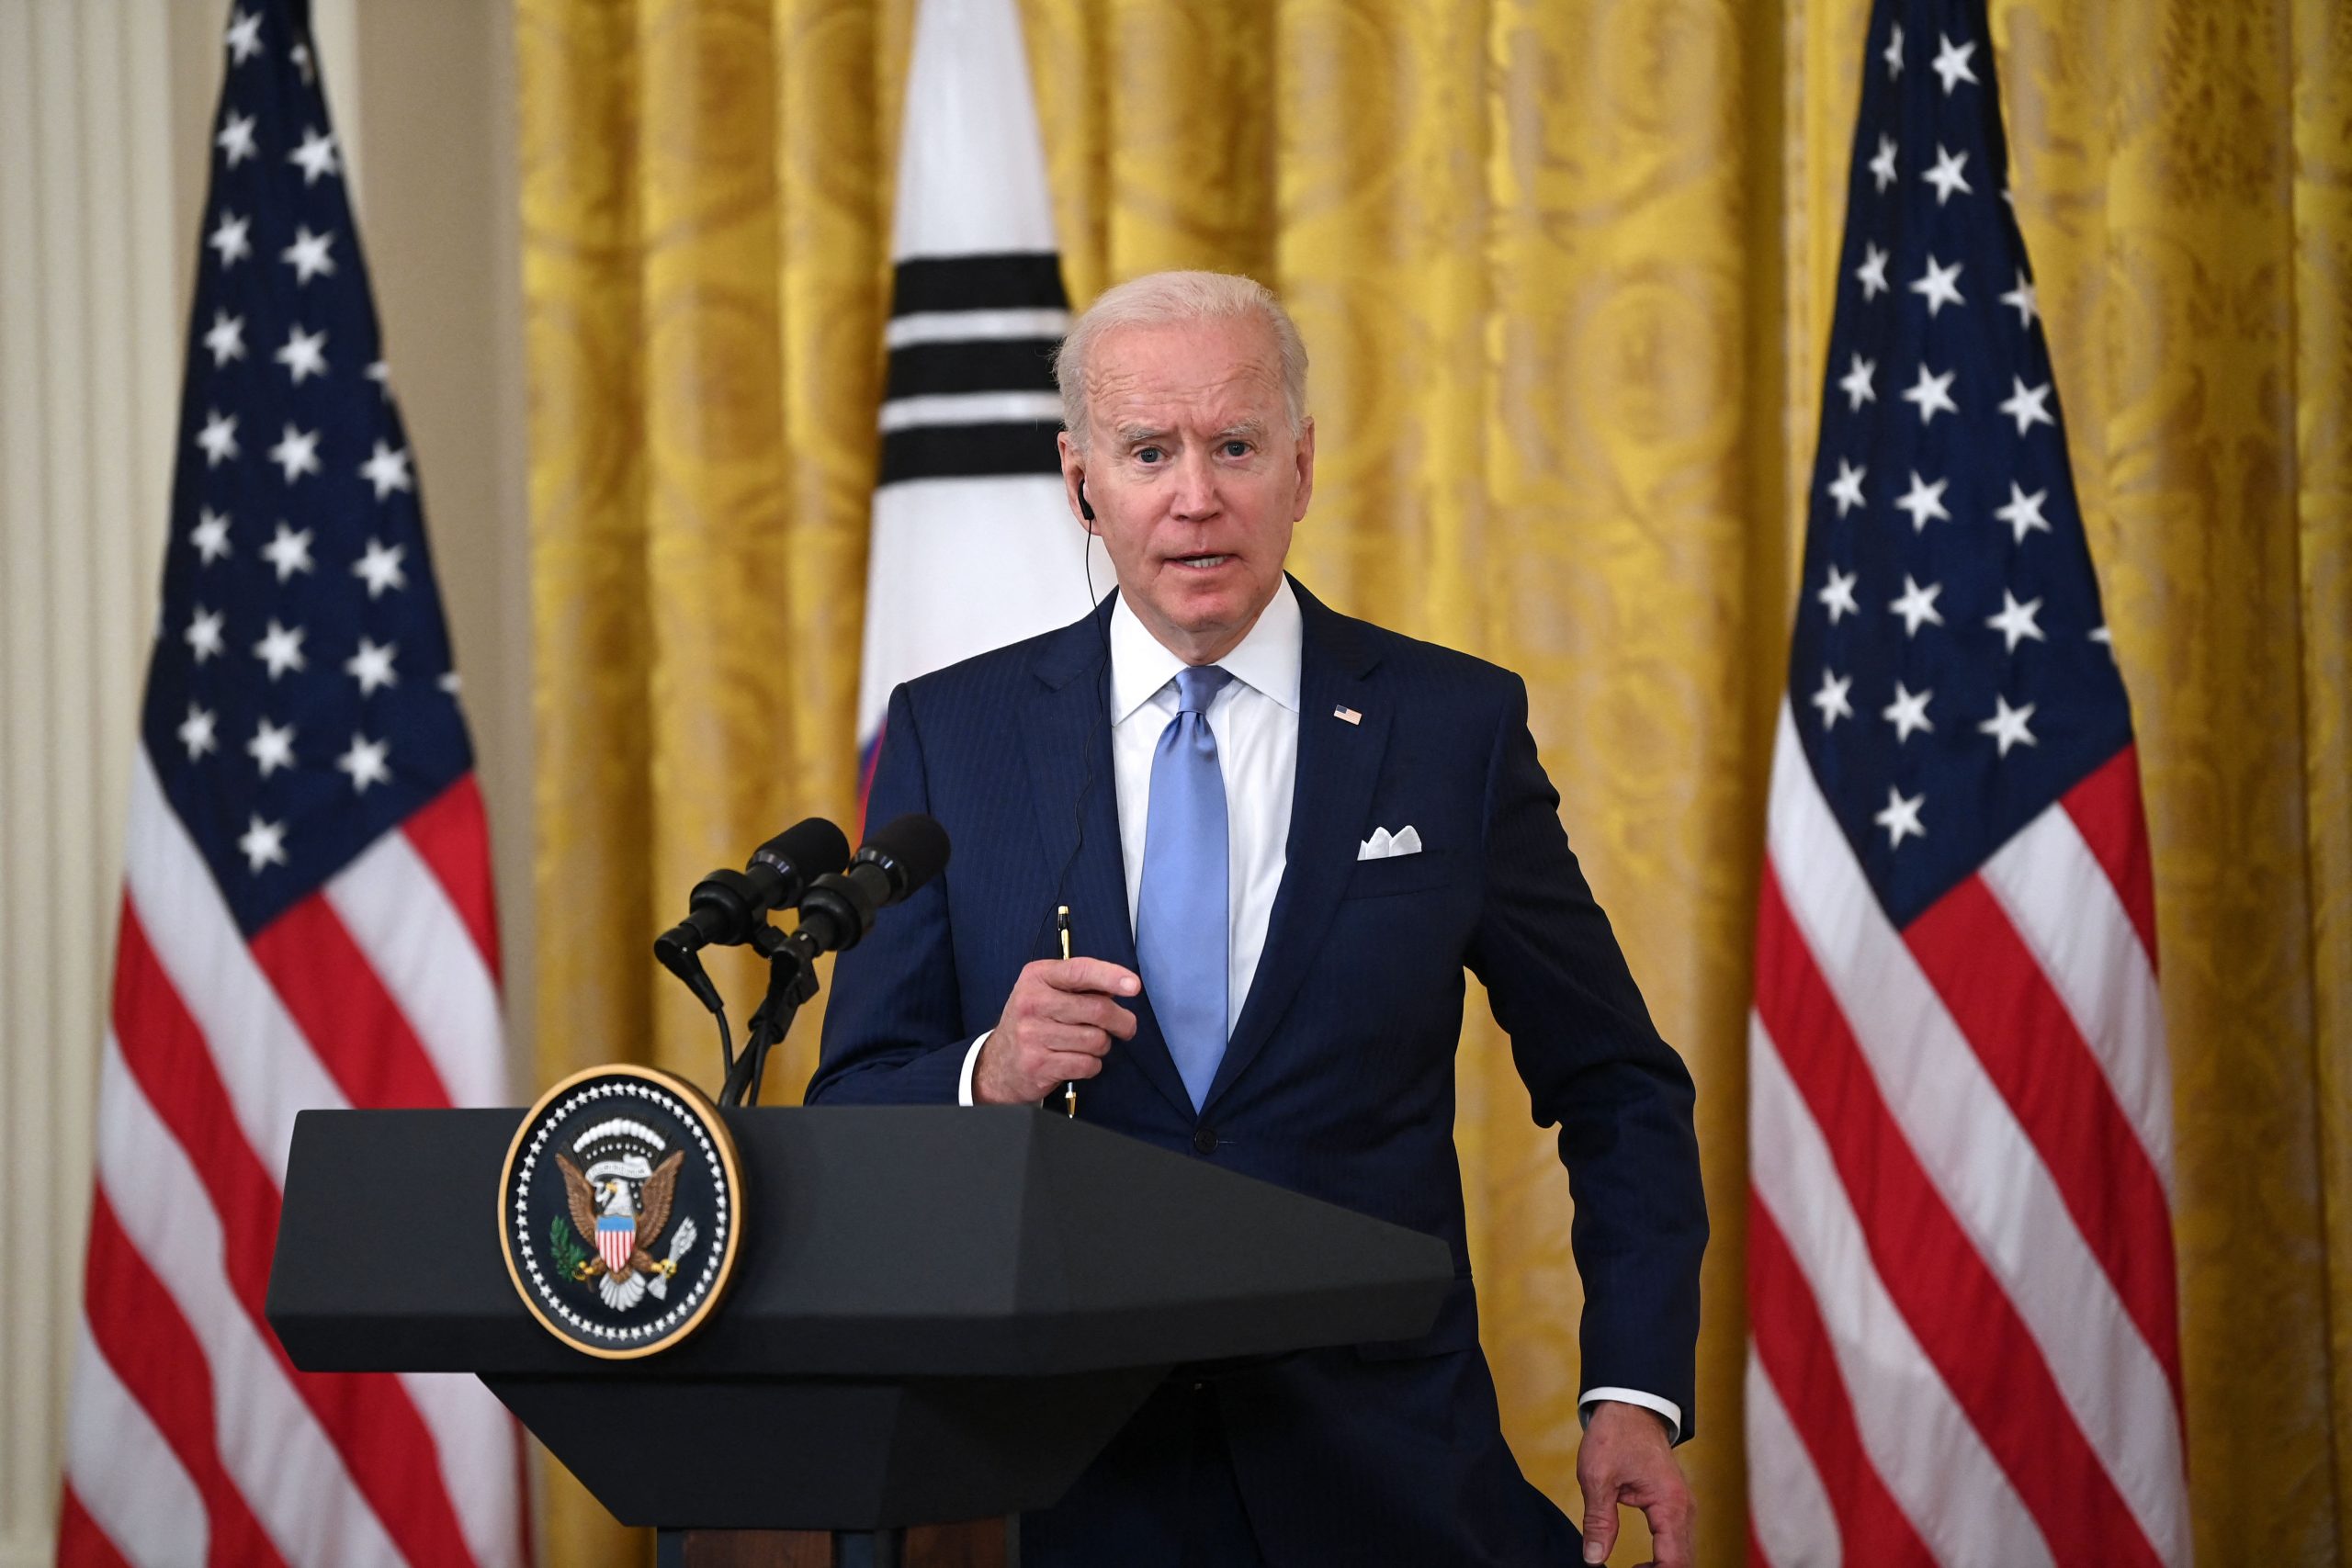 Joe Biden made false claims about COVID, child tax-credit: Reports